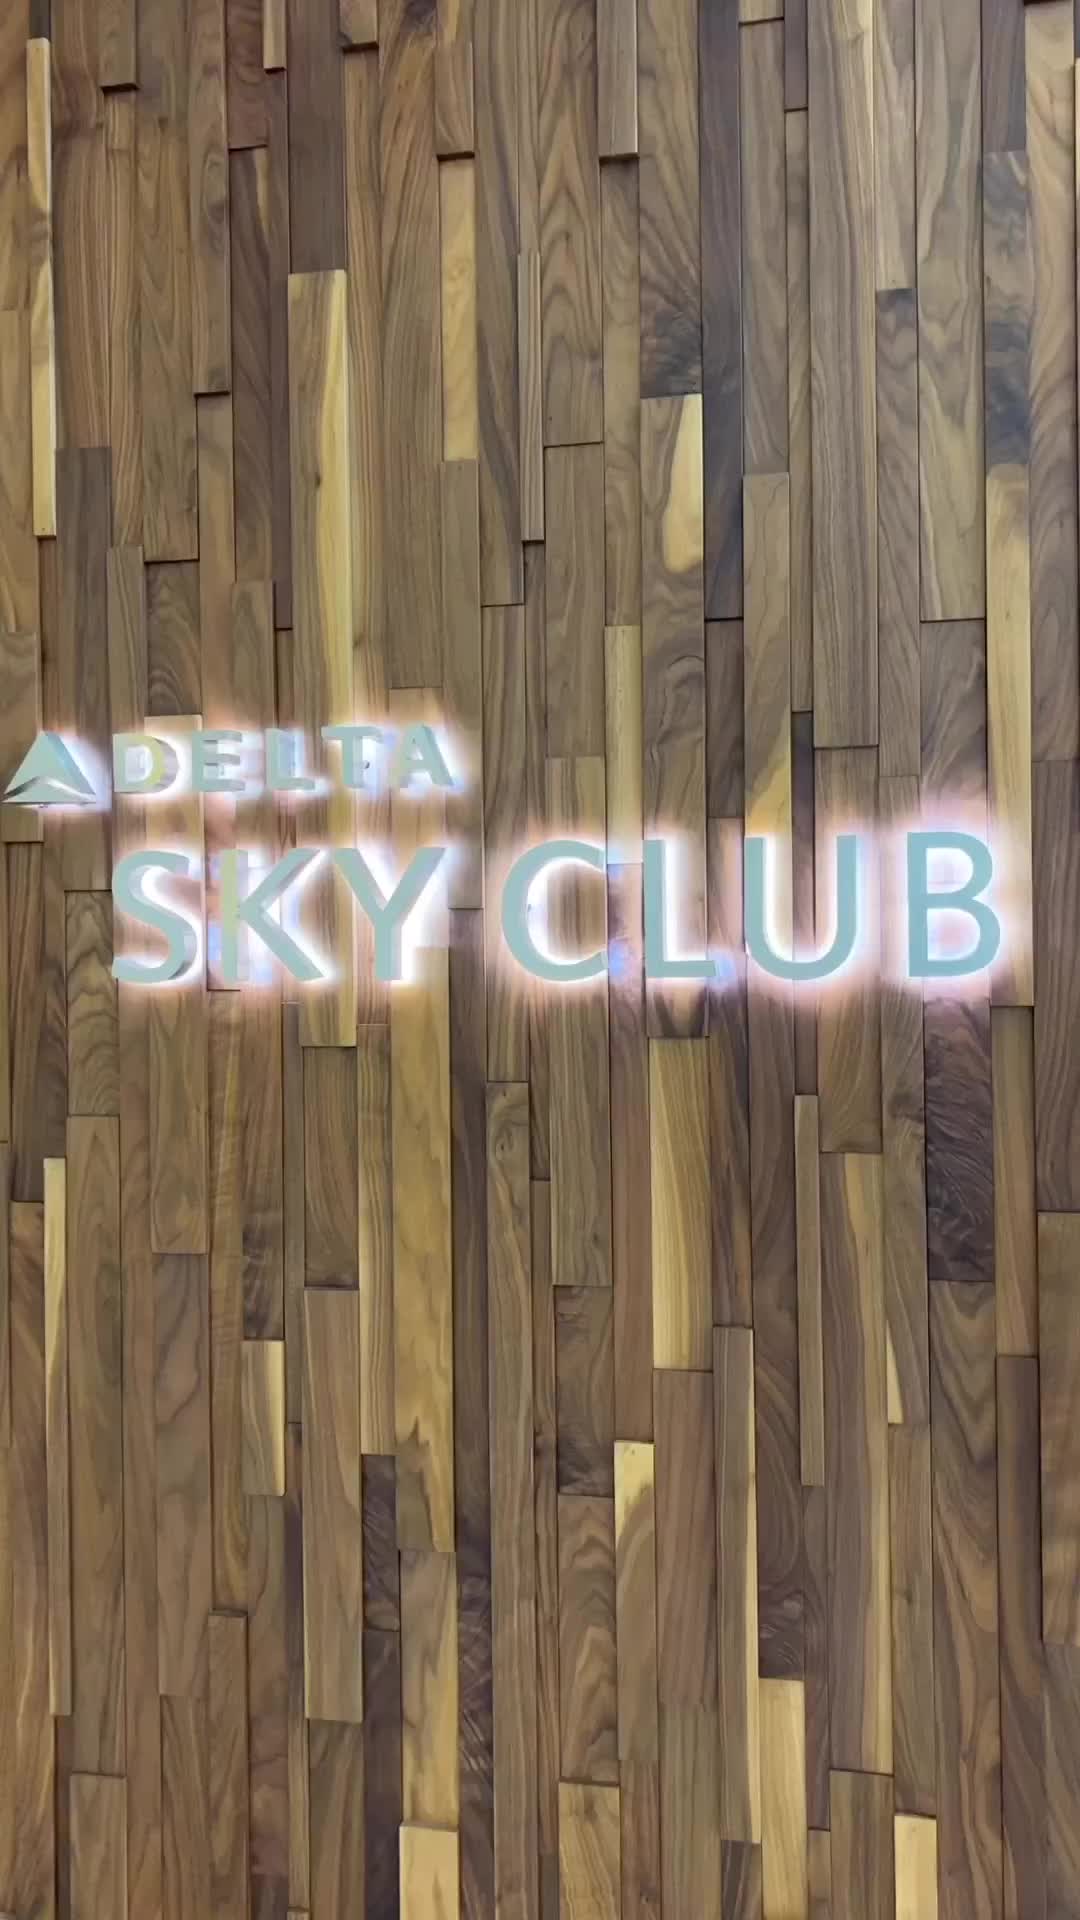 Discover the New Delta Sky Club at MSP Airport!